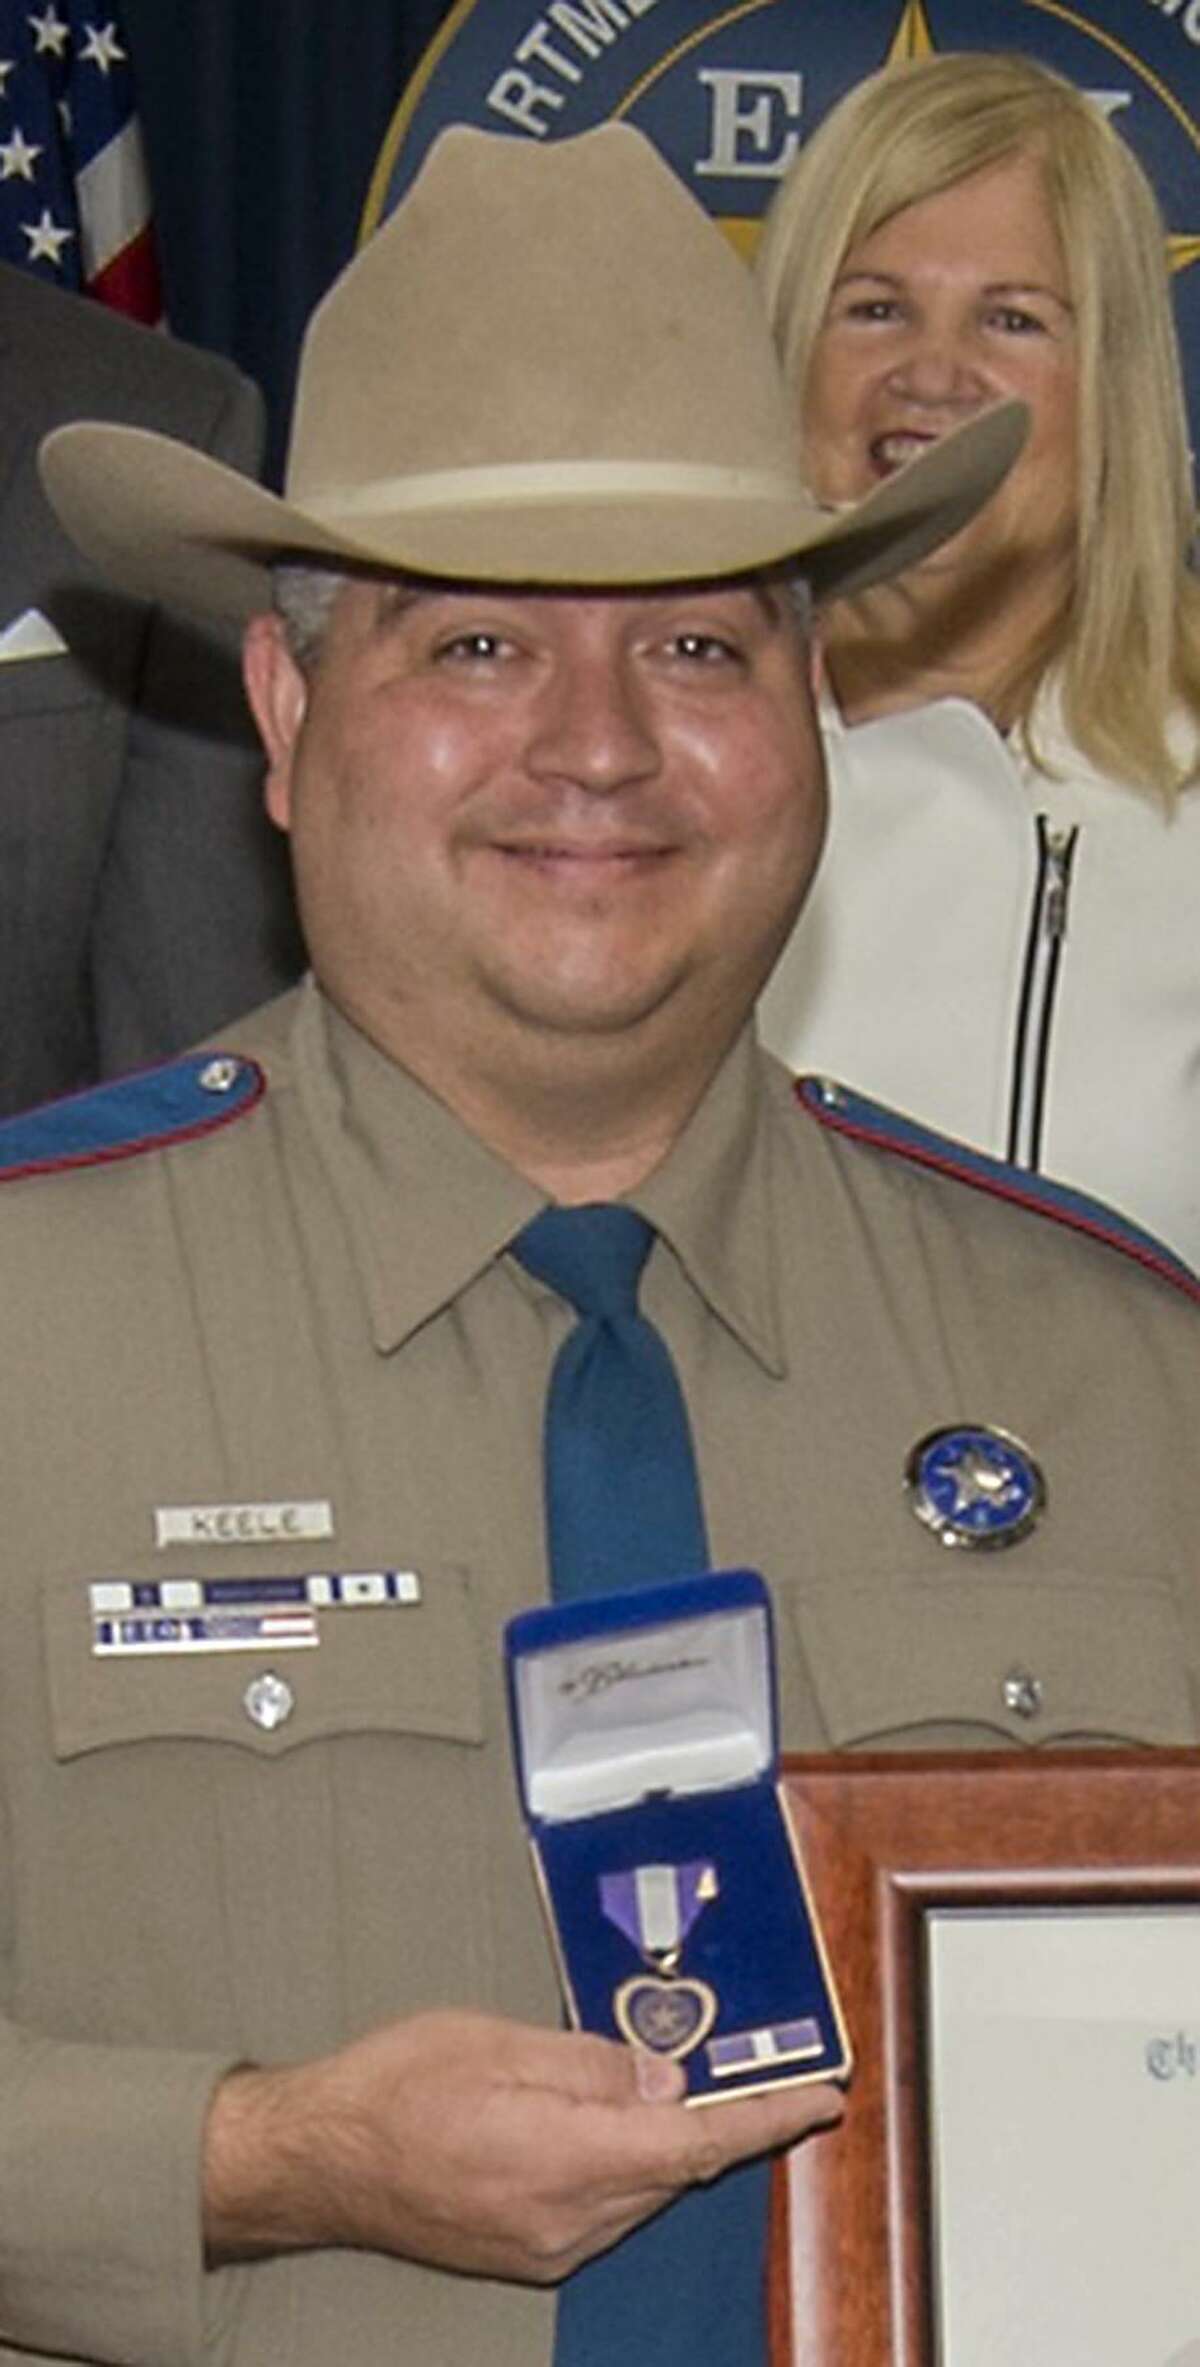 Trooper Timothy Keele received two awards for the injury he suffered during the shooting of Garrett McKinney.